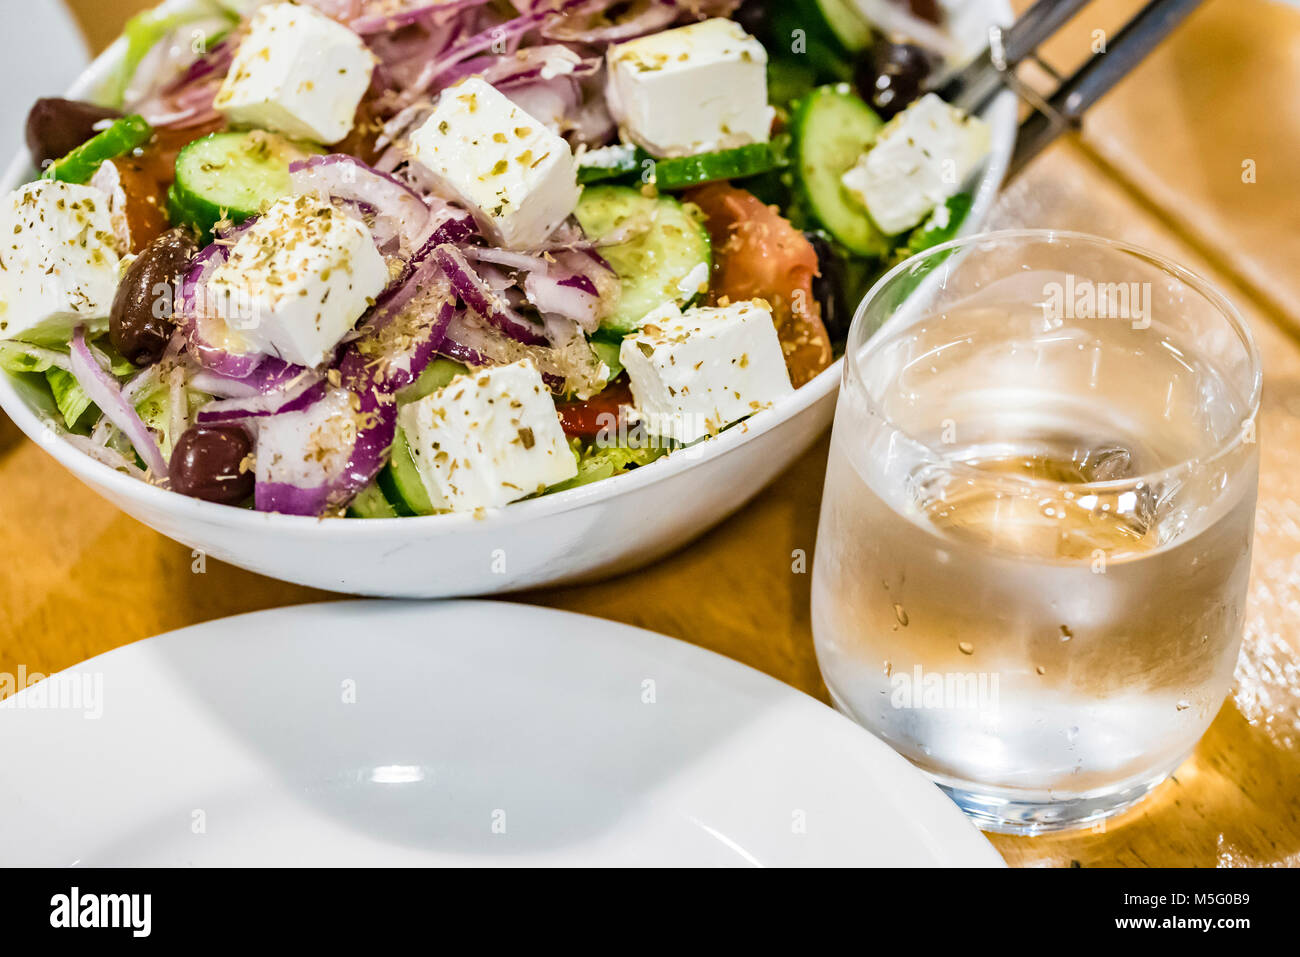 Fresh salad, plate, glass of water on table, closeup. Greek salad with feta cheese, healthy food concept. Stock Photo